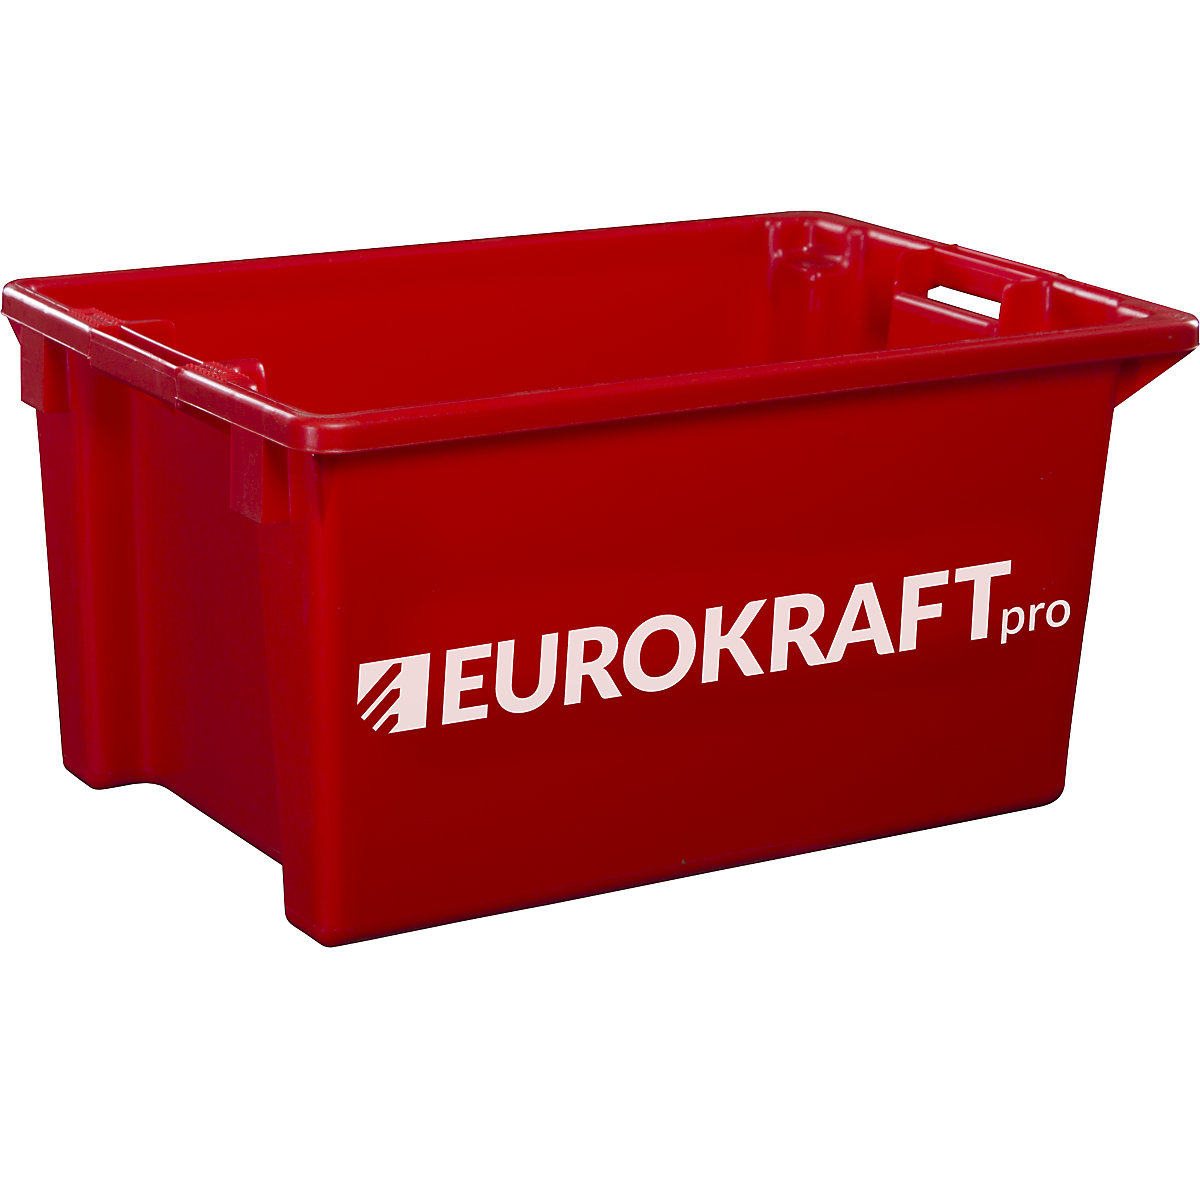 EUROKRAFTpro – Stack/nest container made of polypropylene suitable for foodstuffs, 70 l capacity, pack of 2, solid walls and base, red